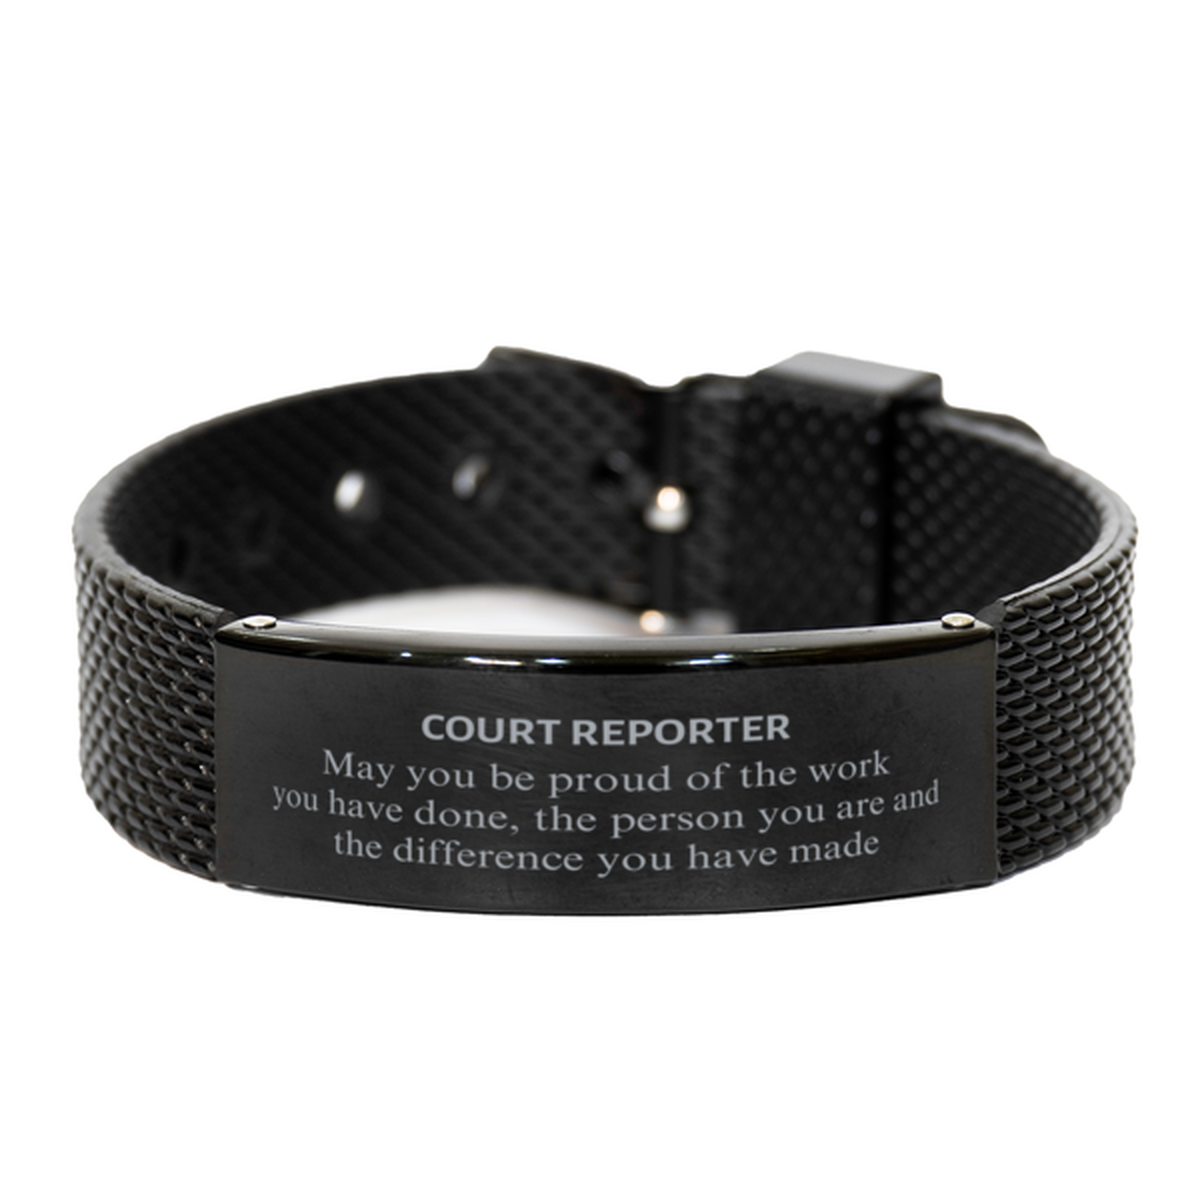 Court Reporter May you be proud of the work you have done, Retirement Court Reporter Black Shark Mesh Bracelet for Colleague Appreciation Gifts Amazing for Court Reporter